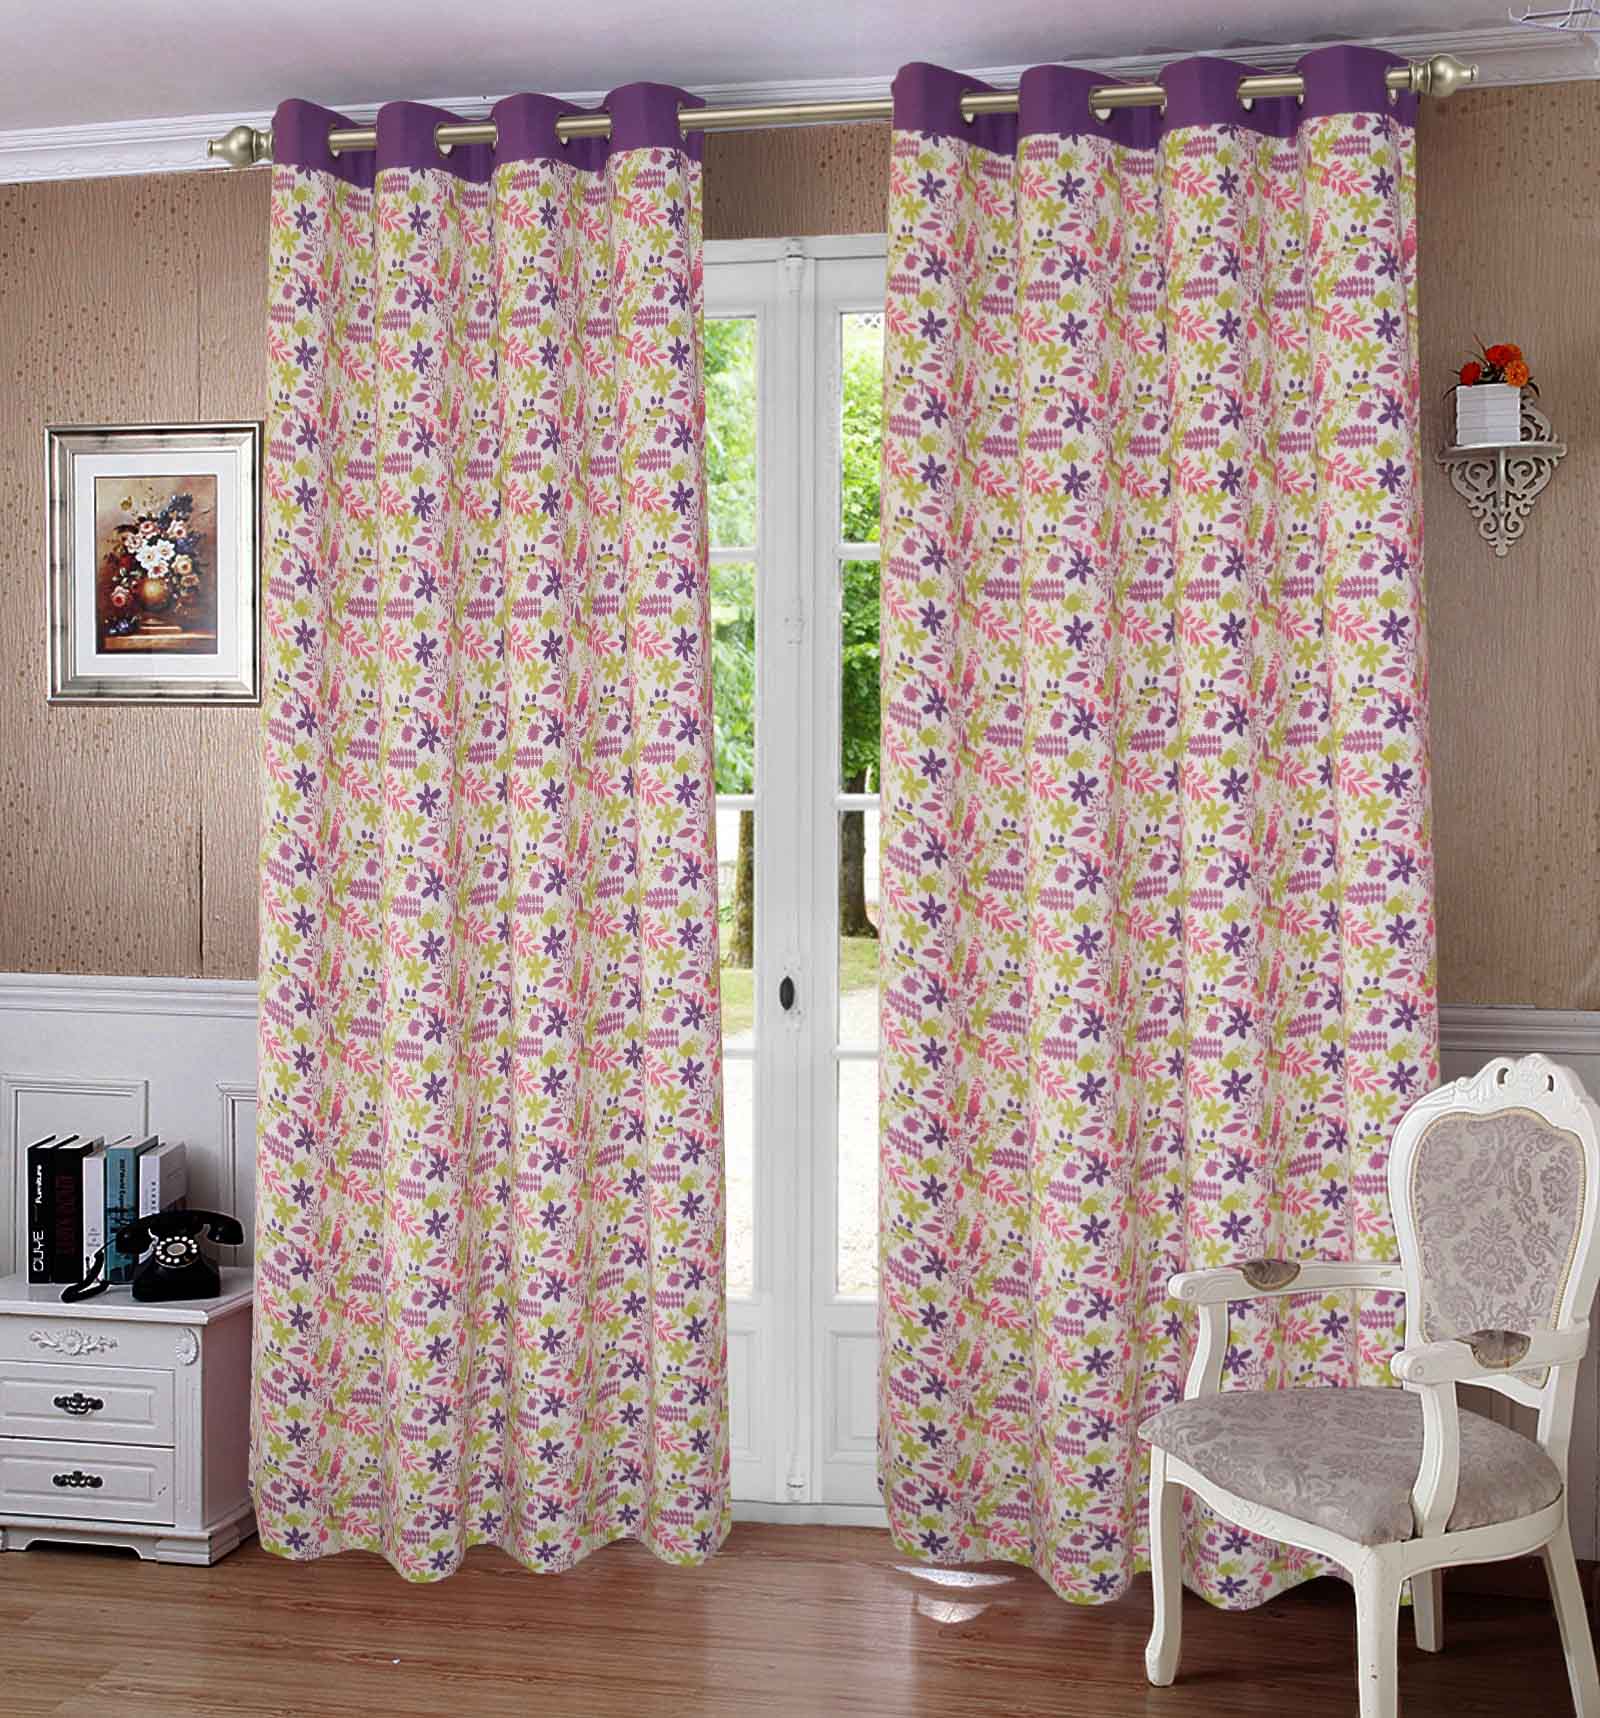 Lushomes Door Curtain, Cotton Purple Rain Printed Cotton Curtains for Living Room/Home with 8 Eyelets & Printed Tiebacks Door Curtain, Curtain 7.5 Feet, Screen for Window, (Size 54x90 Inches, Set of 1)